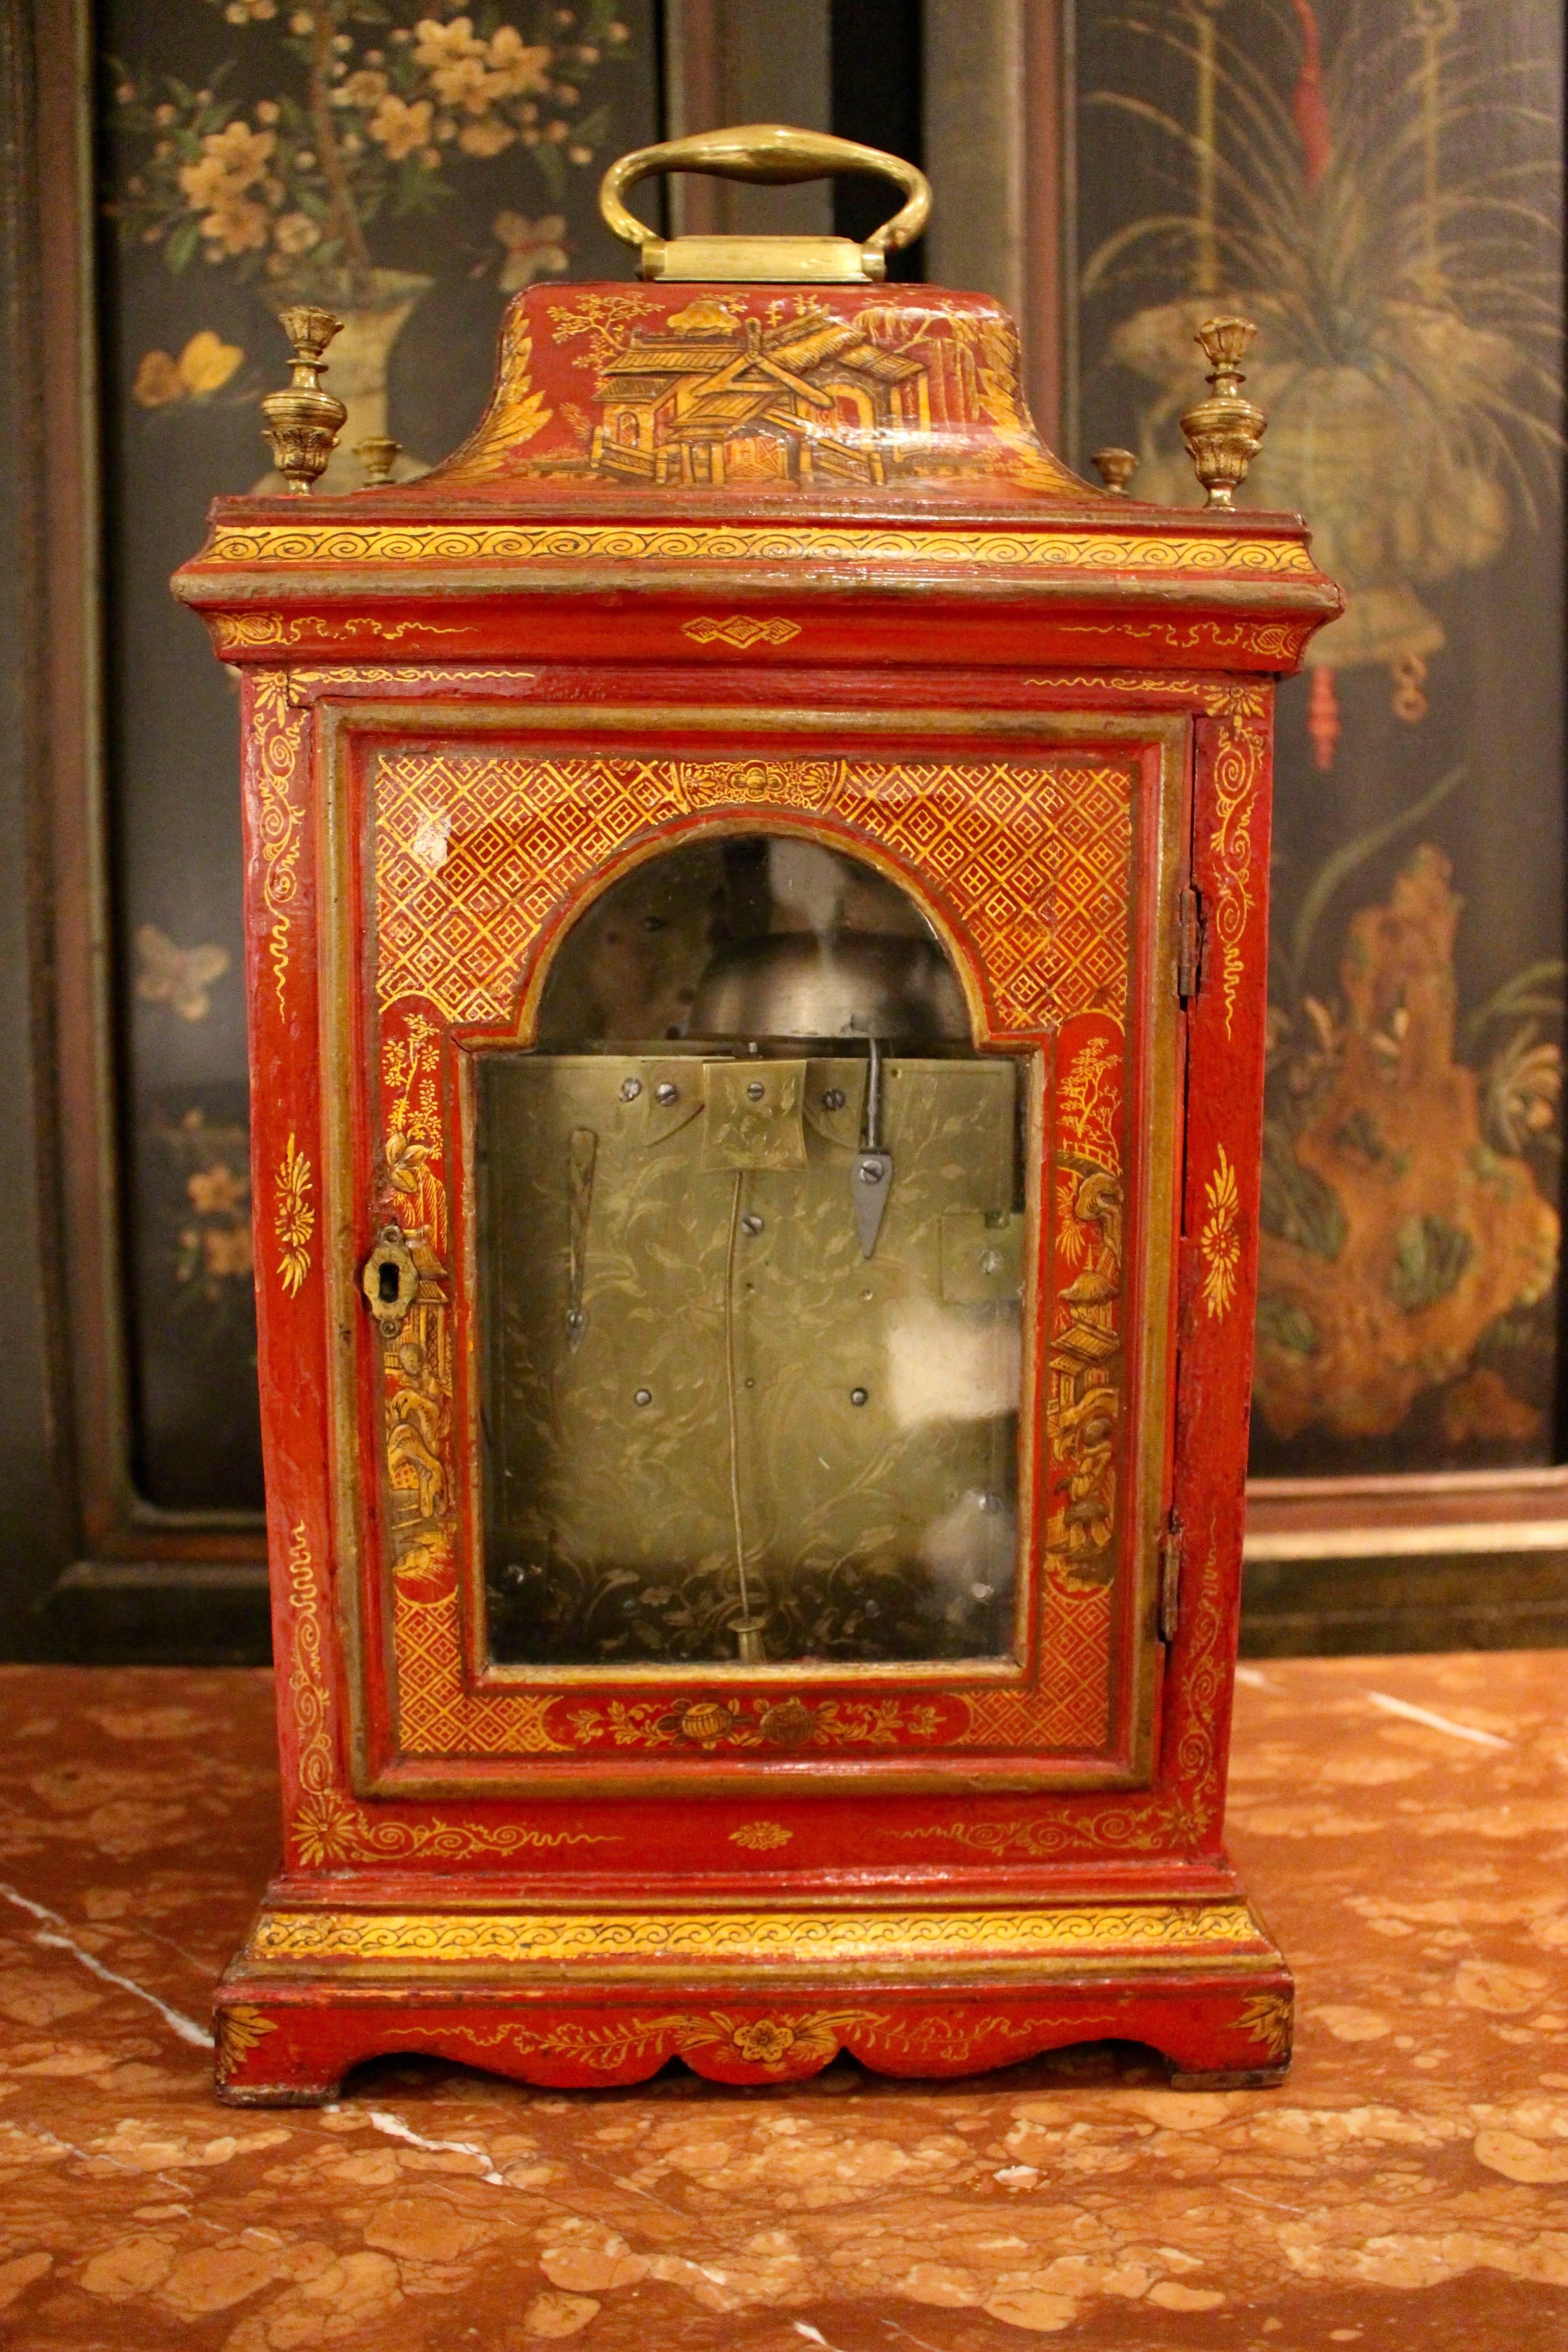 English George II Parcel-Gilt Scarlet-Japanned Chinoiserie Table Clock by William Creak For Sale